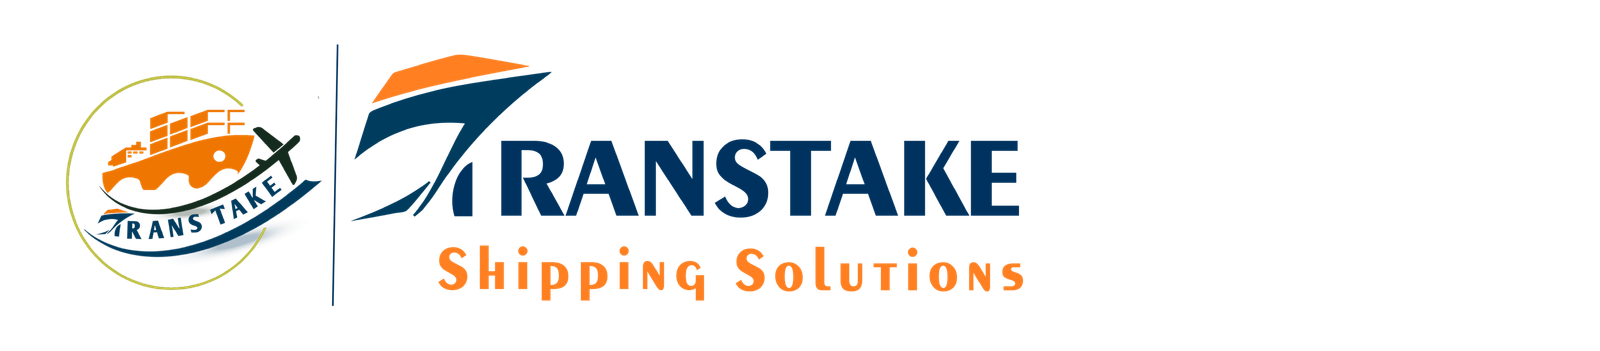 TransTake Shipping Solutions